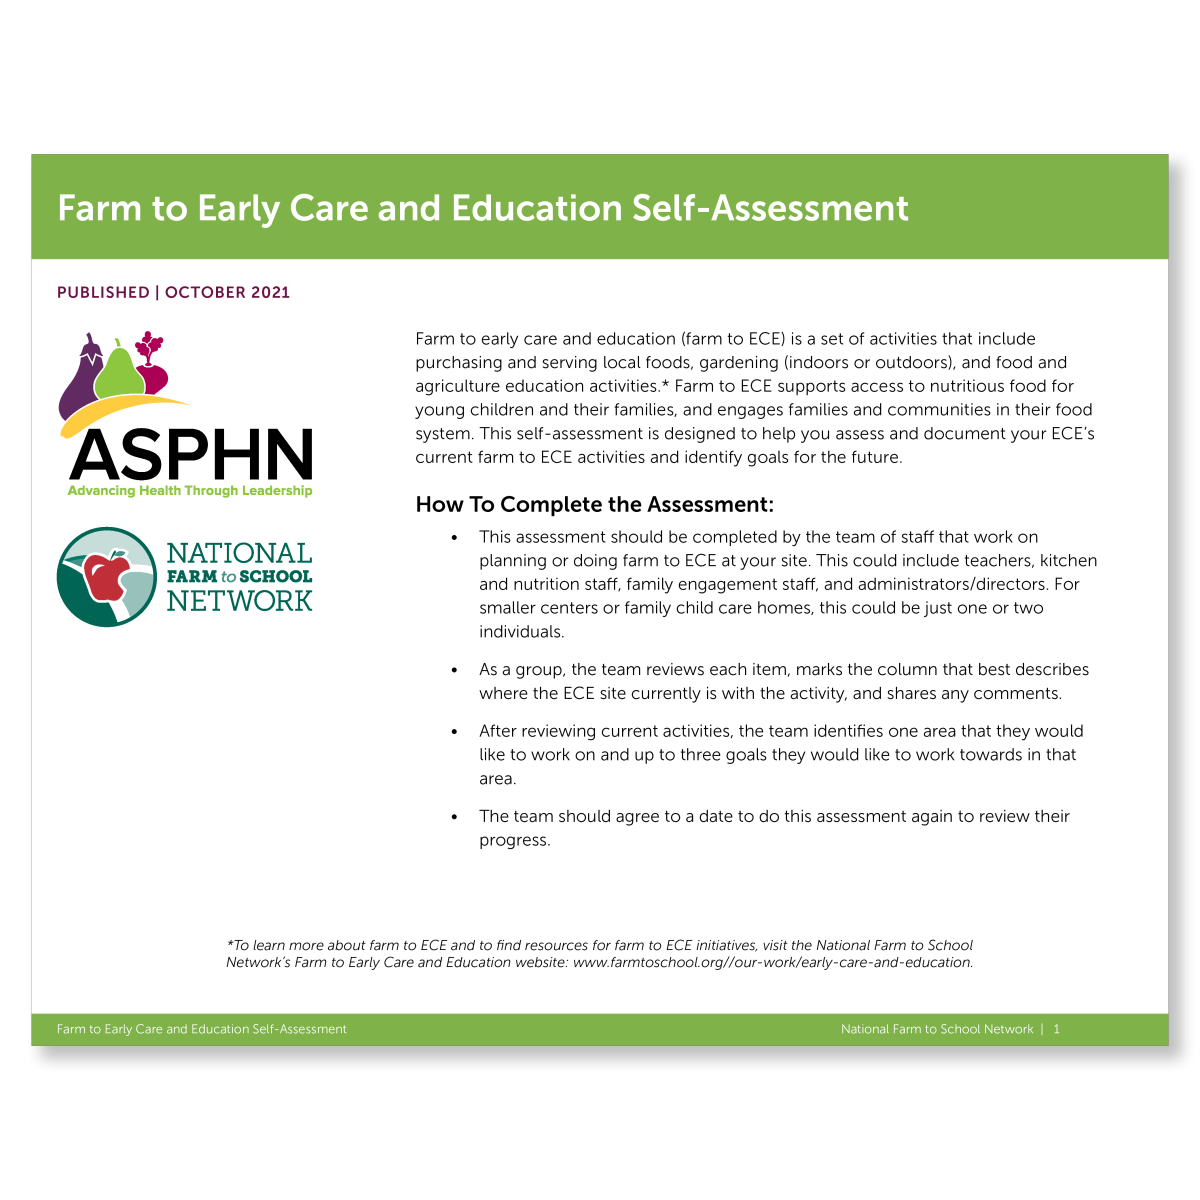 Farm to Early Care and Education Self-Assessment